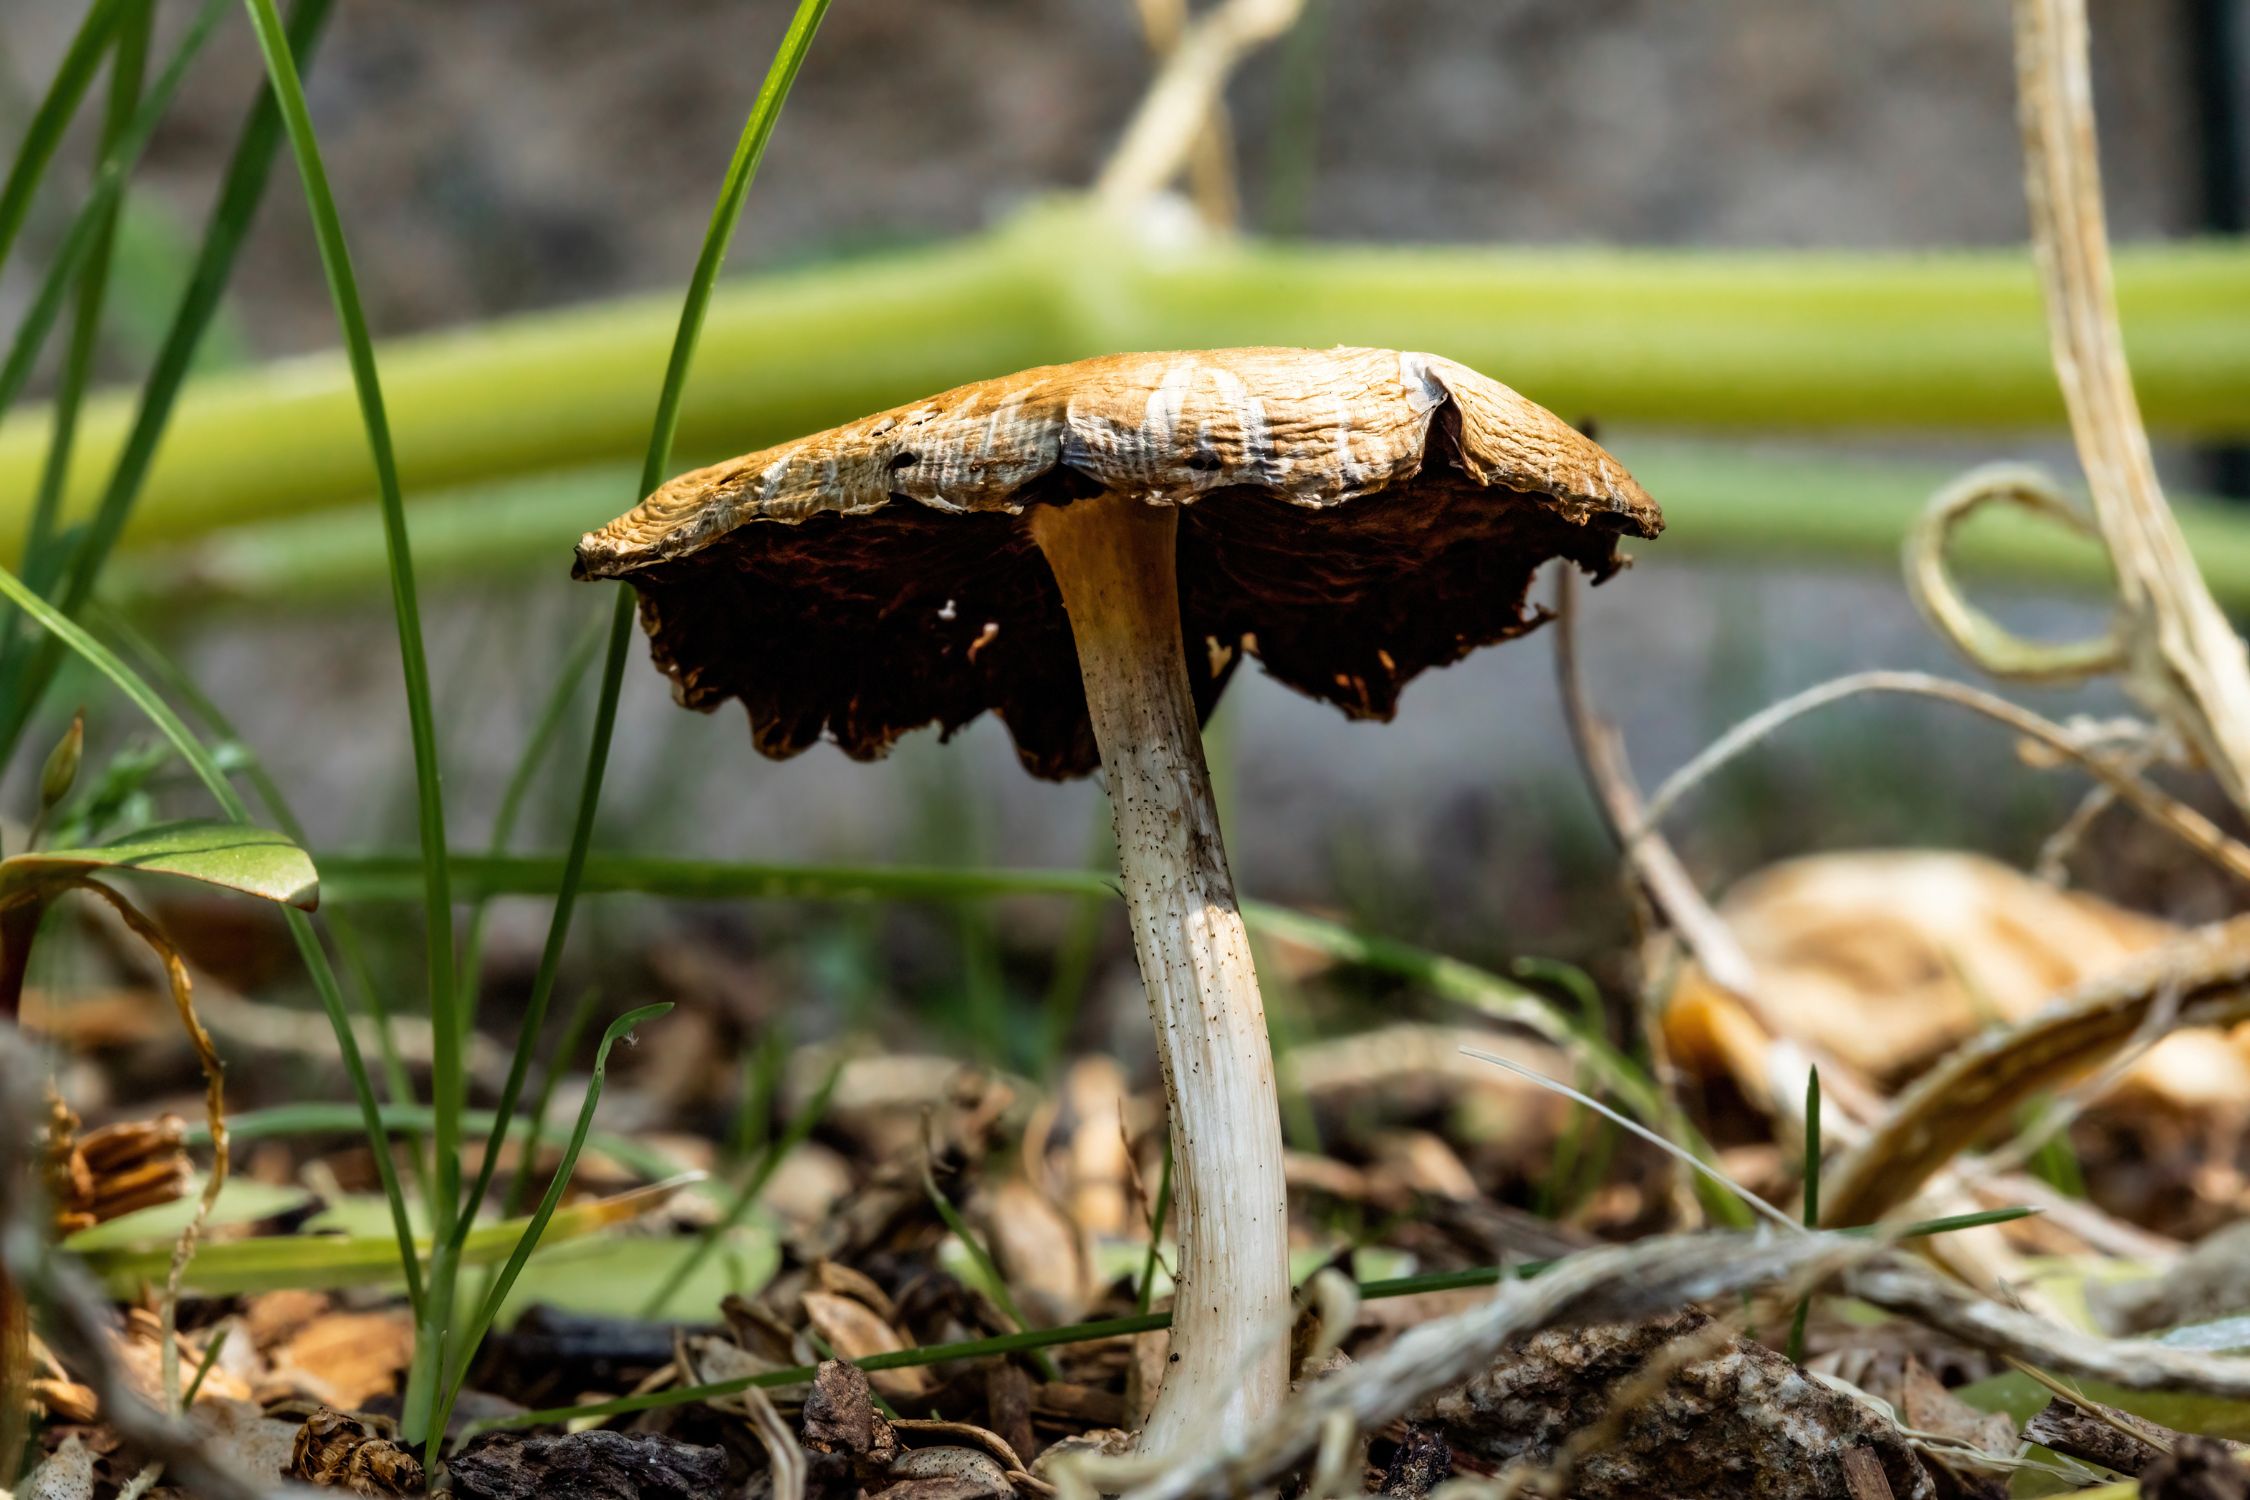 How To Prevent Fungus Growing in Your Garden